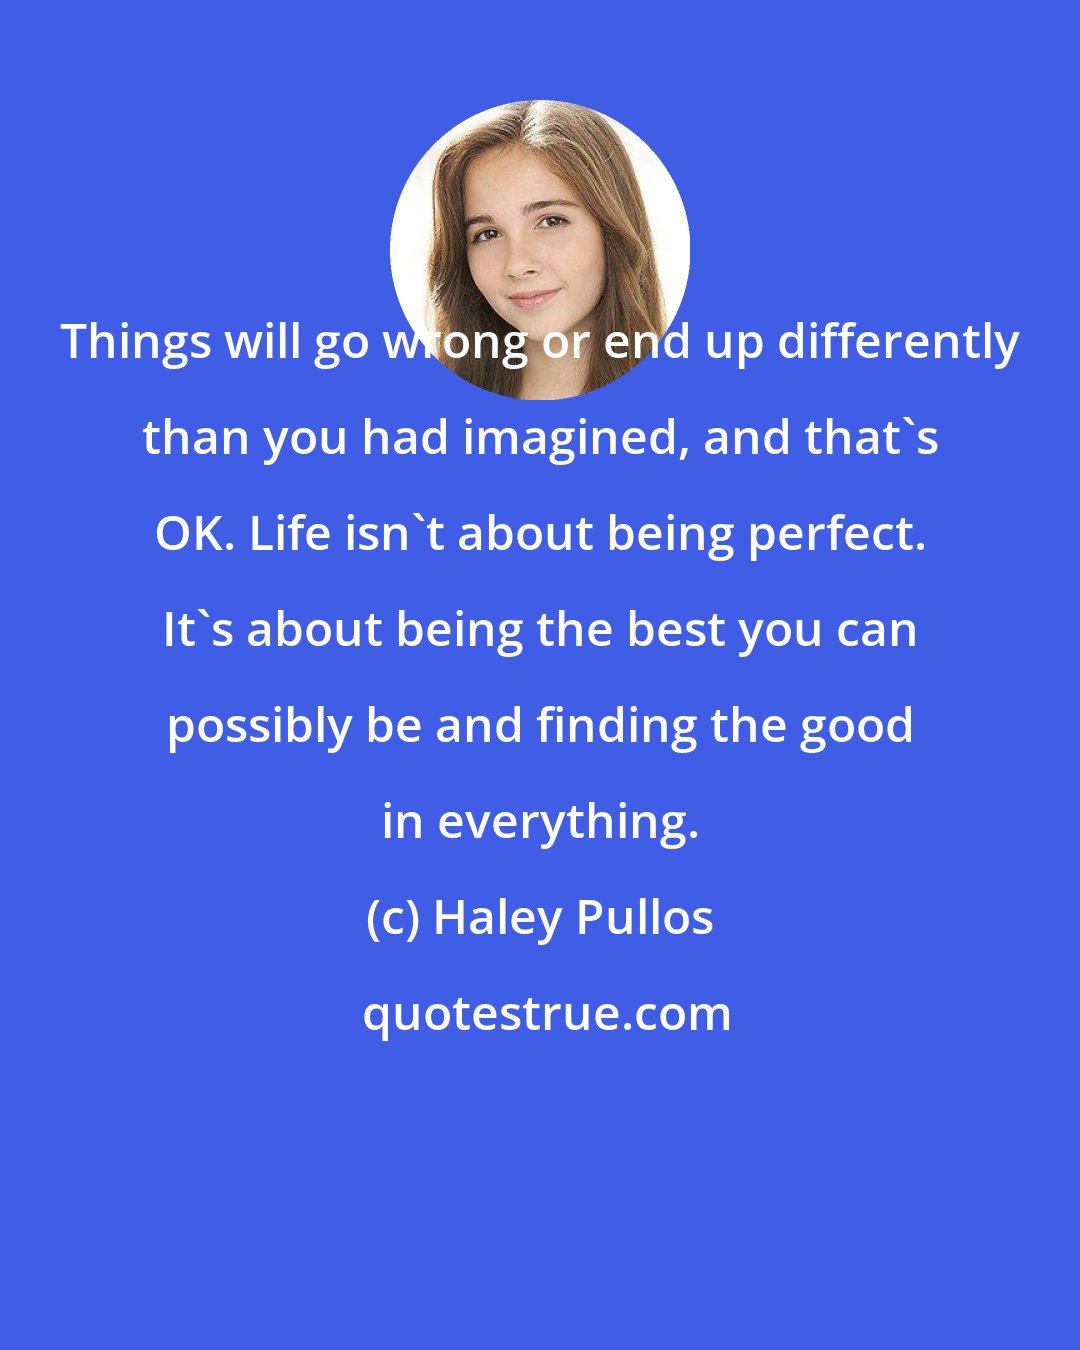 Haley Pullos: Things will go wrong or end up differently than you had imagined, and that's OK. Life isn't about being perfect. It's about being the best you can possibly be and finding the good in everything.